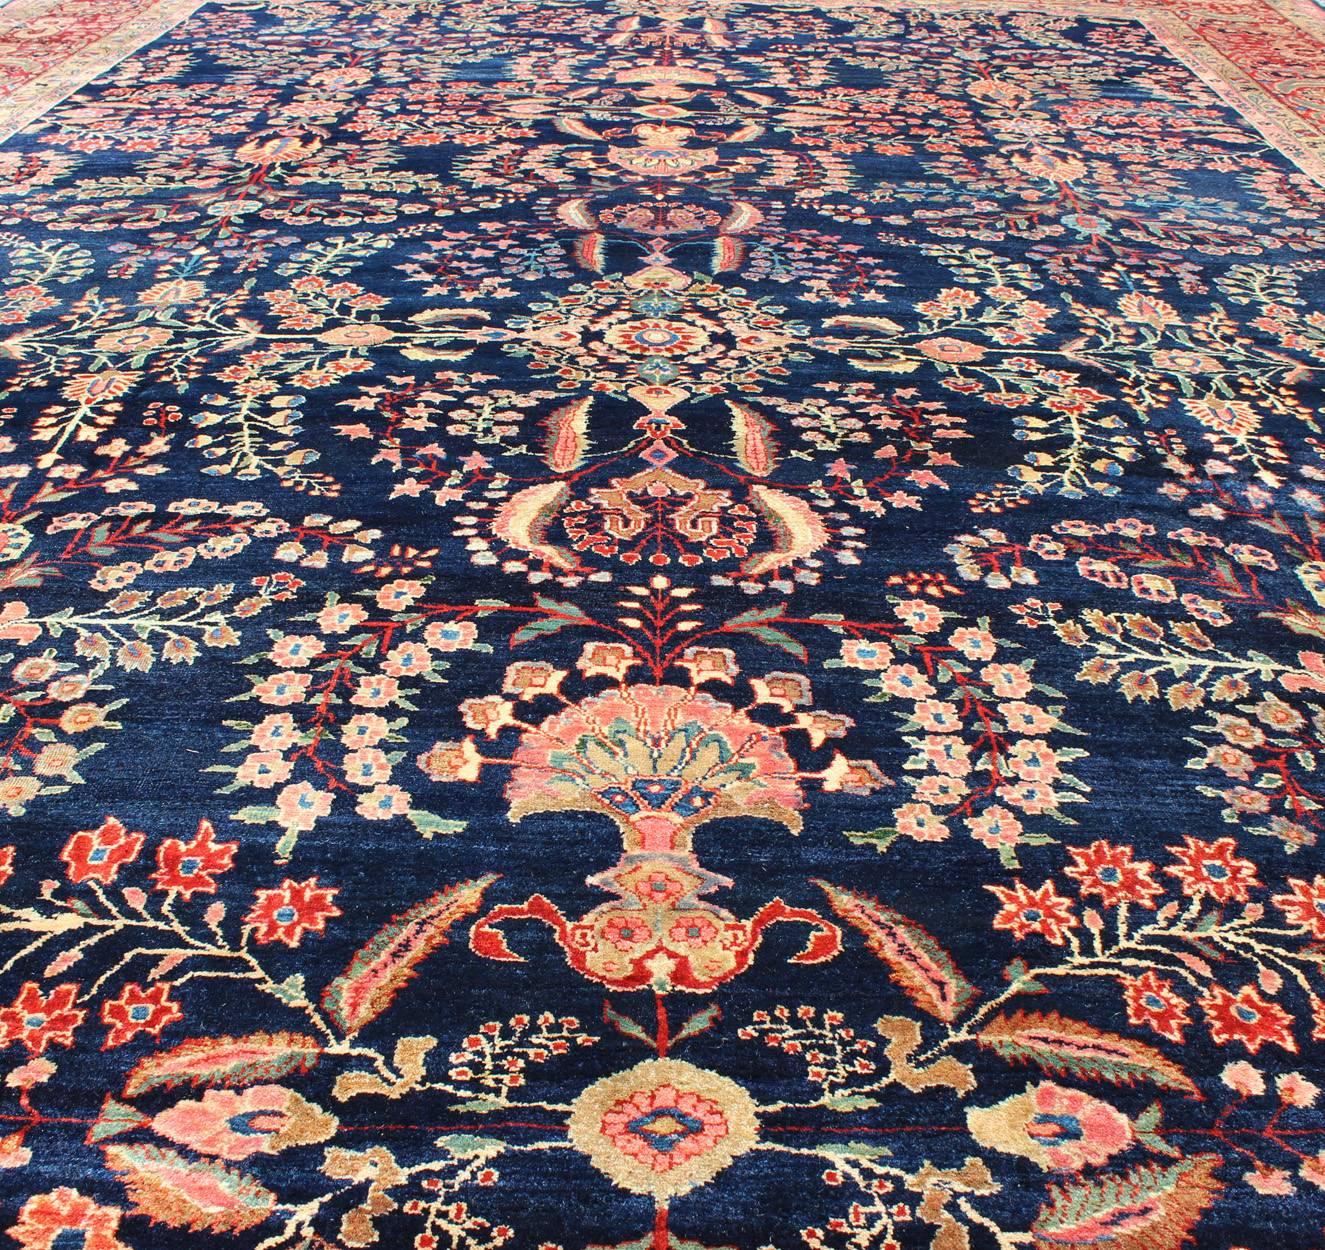 Early 20th Century Antique Persian Finely Woven Sarouk Ferahan Rug with Intricate Details